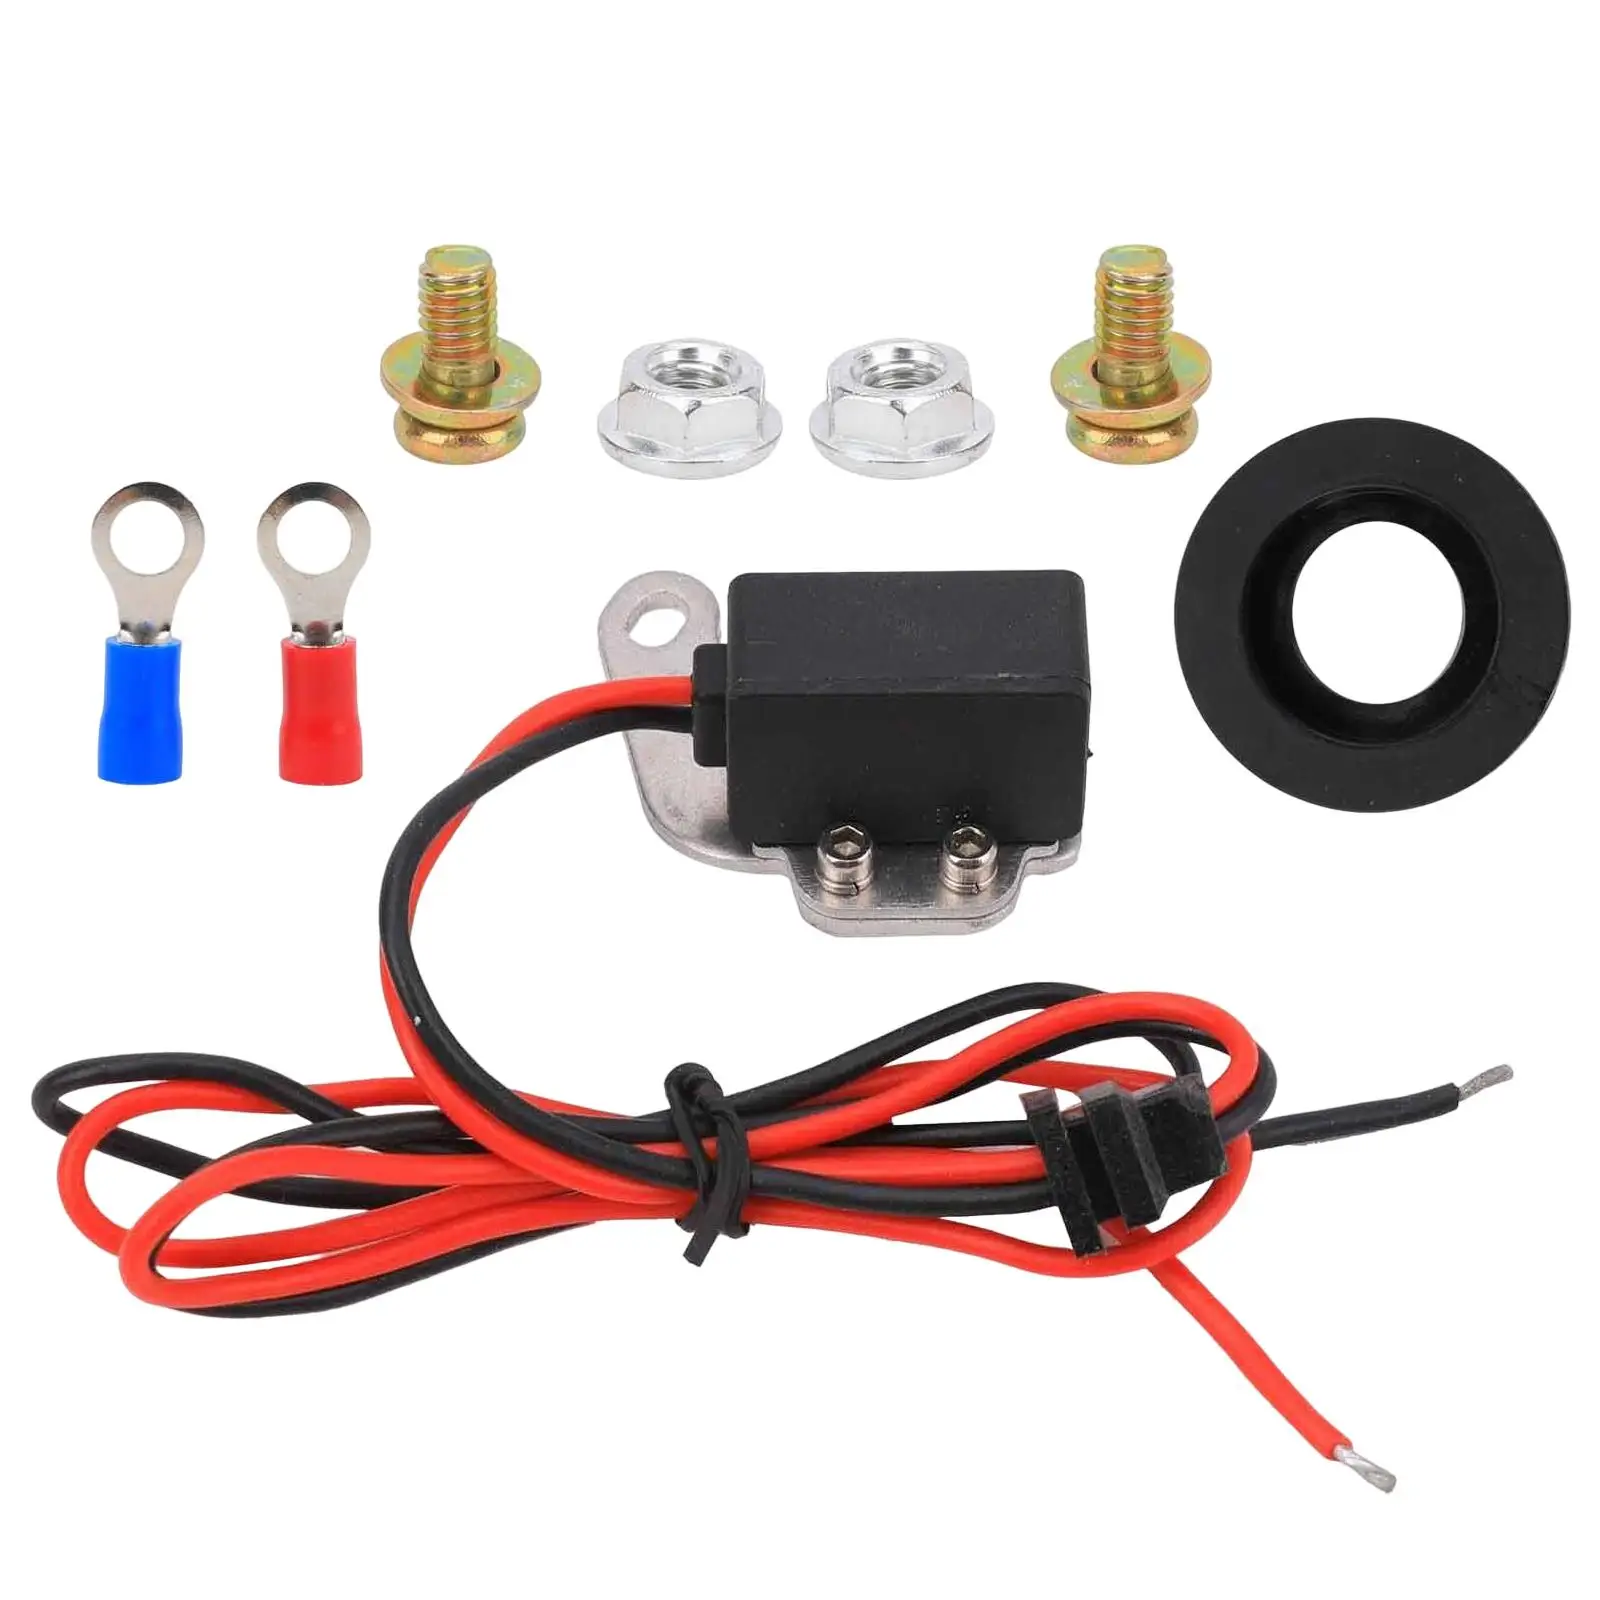 Ignition Points to Electronic Conversion Kit Electronic Ignition Conversion Kit Spare Parts Replaces 1281 for Ford V8